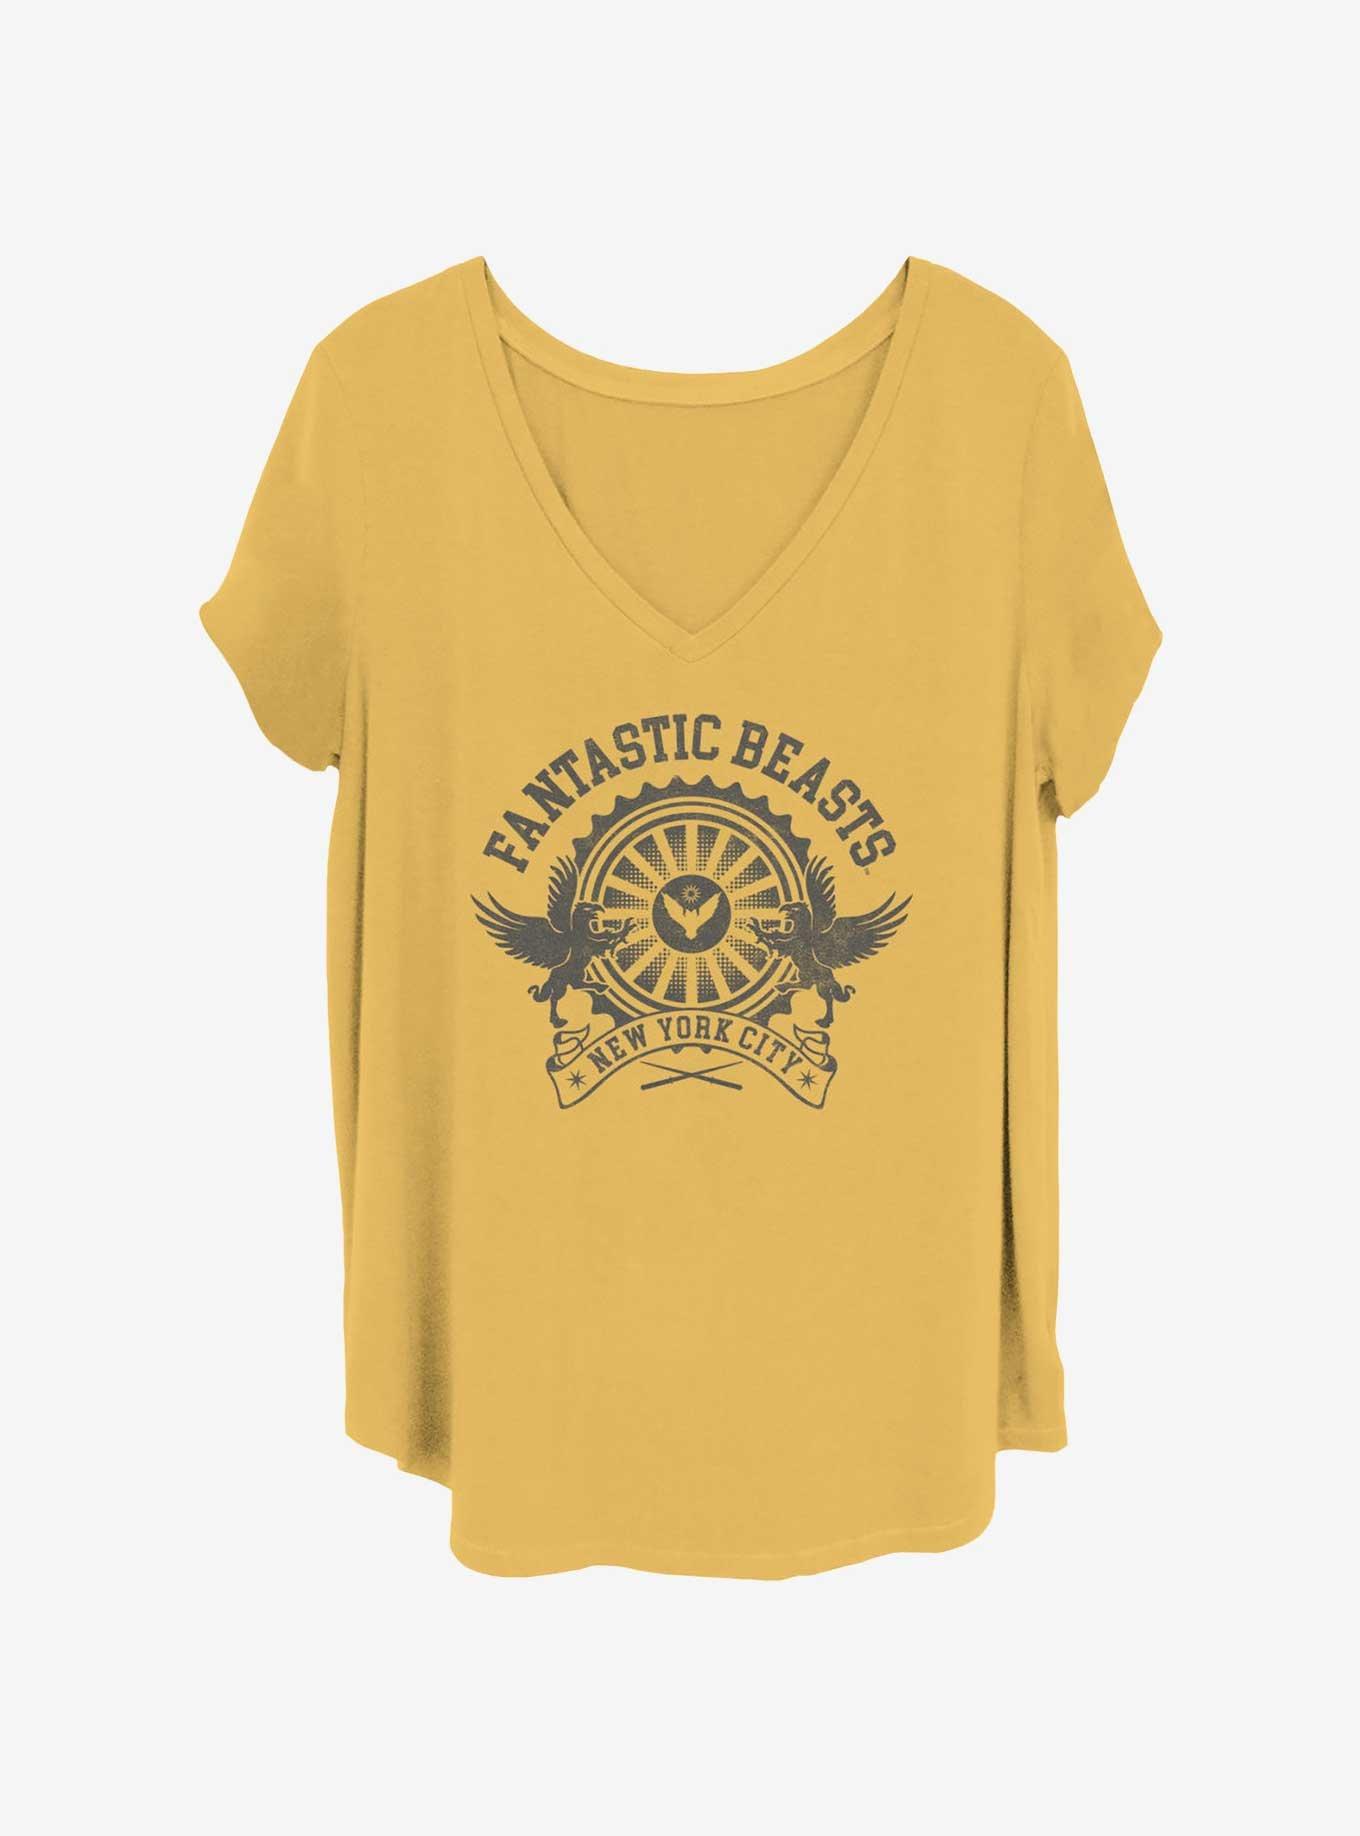 Fantastic Beasts and Where to Find Them Crest Girls T-Shirt Plus